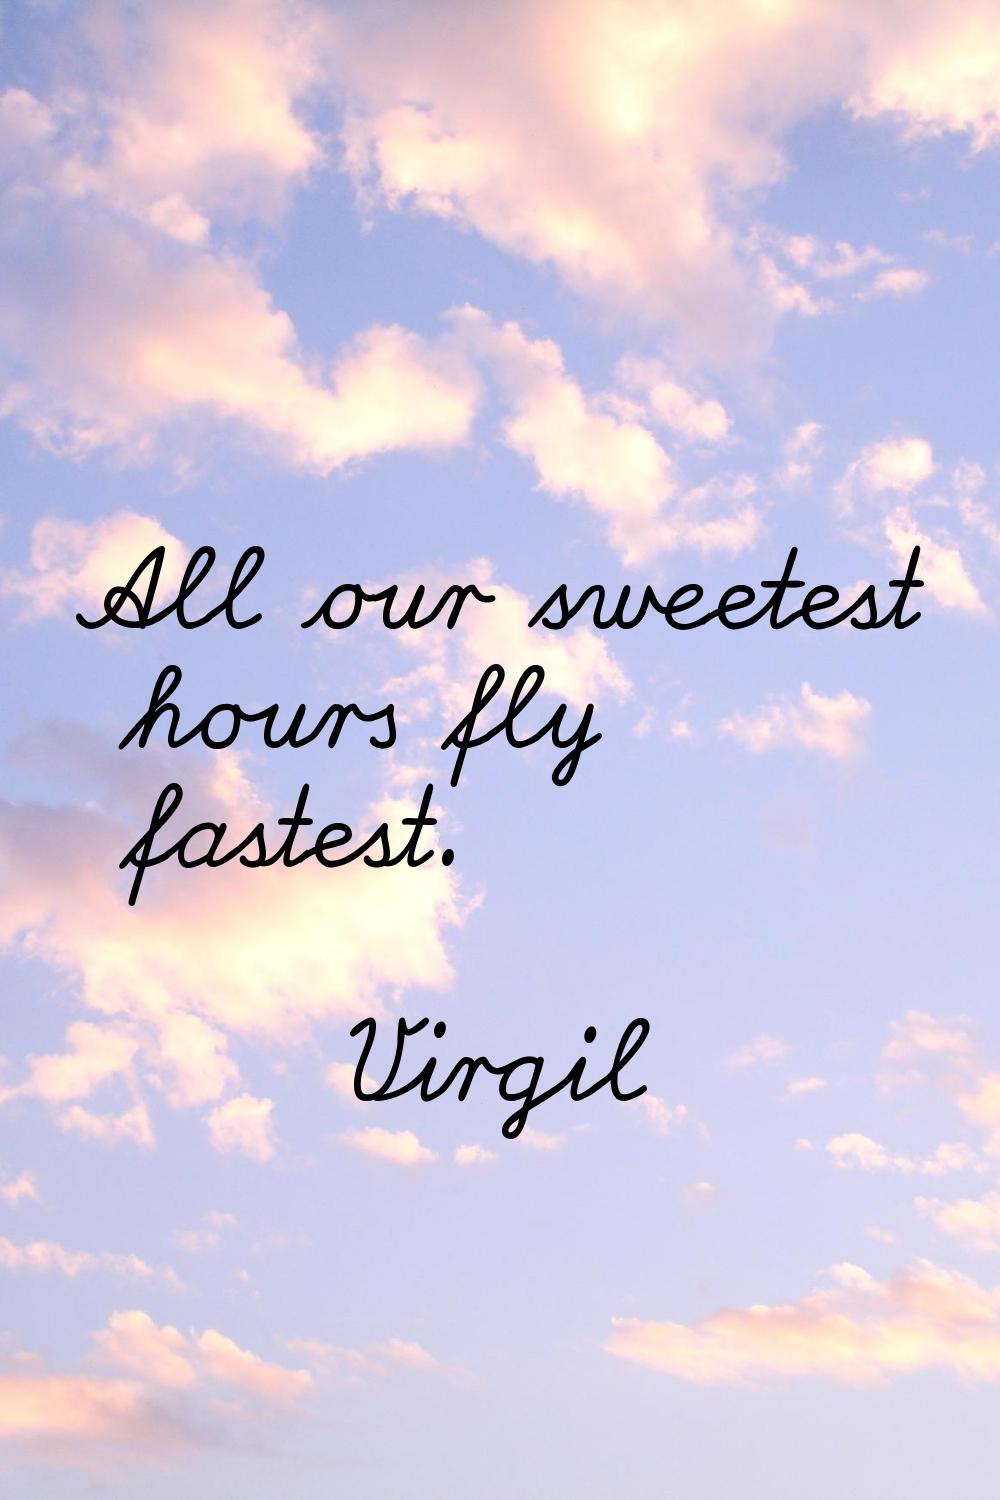 All our sweetest hours fly fastest.